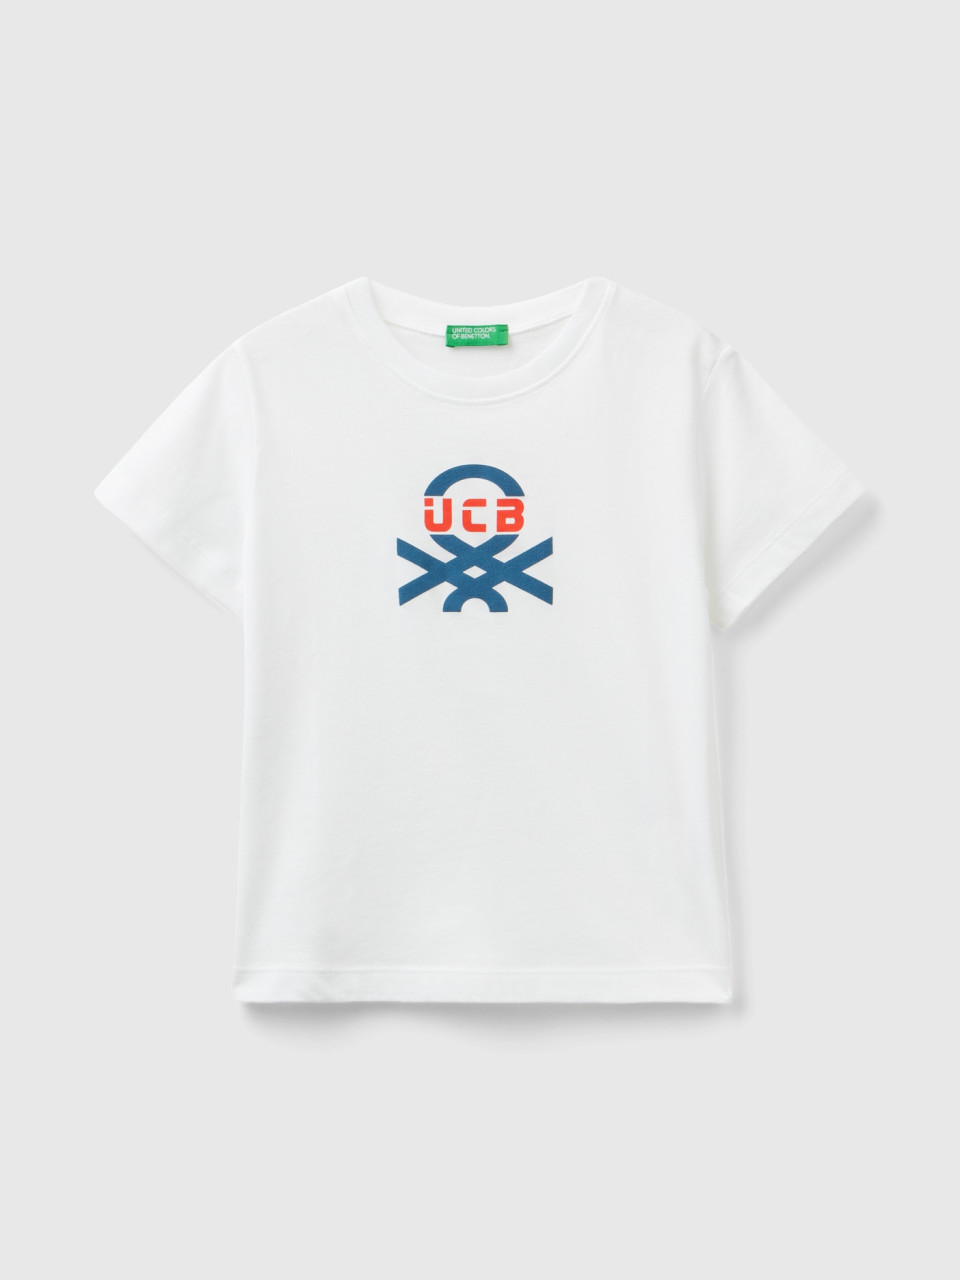 Benetton, T-shirt With Print In 100% Organic Cotton, White, Kids